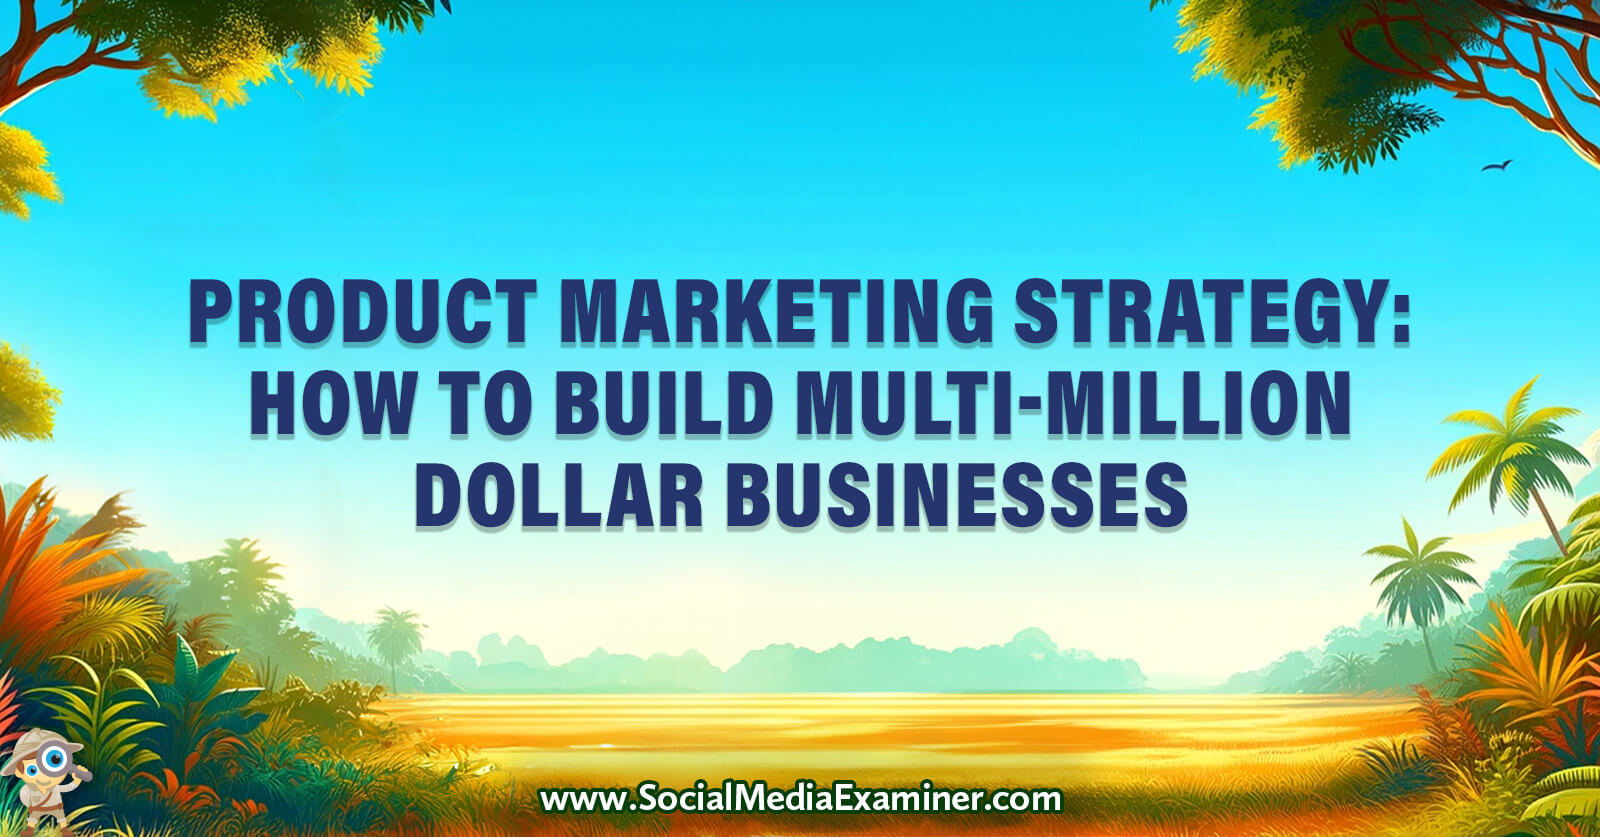 Product Marketing Strategy: How to Build Multi-Million Dollar Businesses by Social Media Examiner